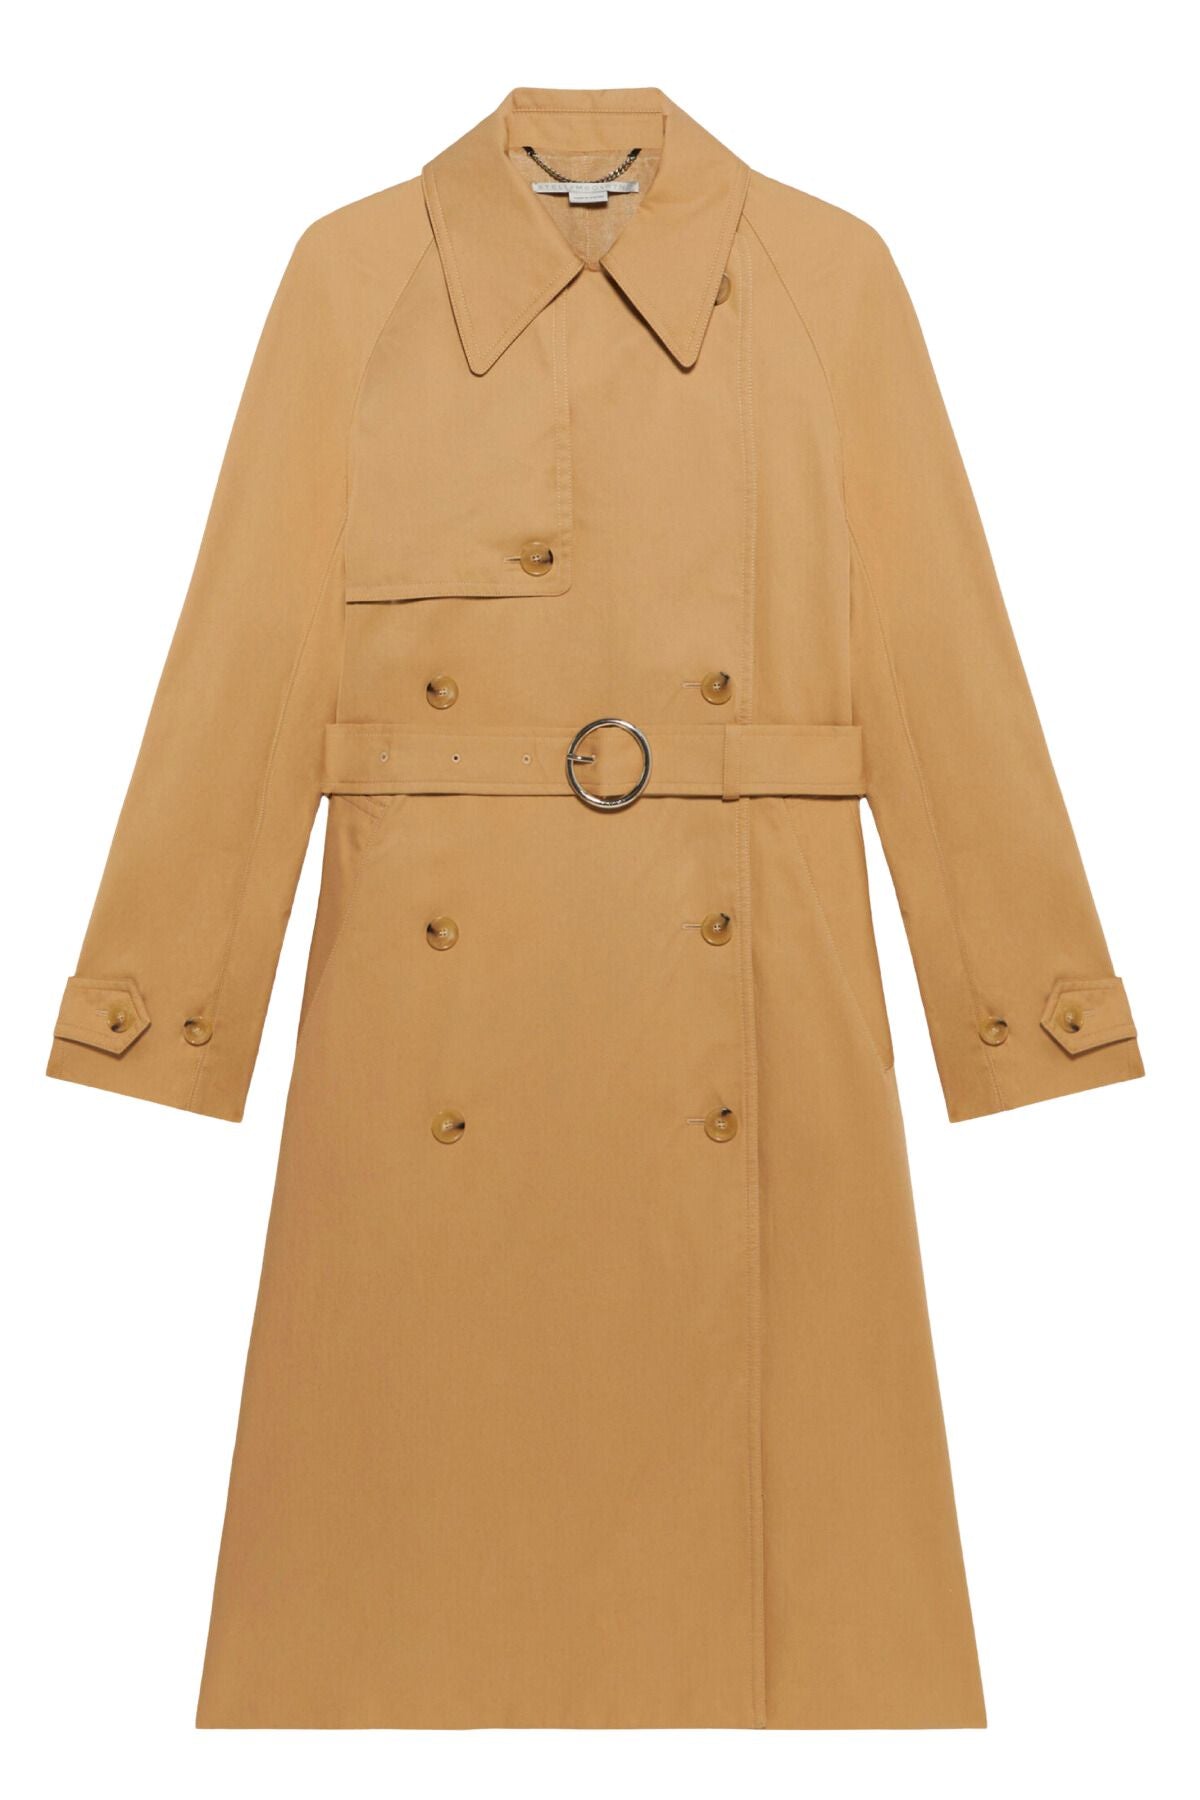 Stella McCartney Double Breasted Iconic Trench - Fawn